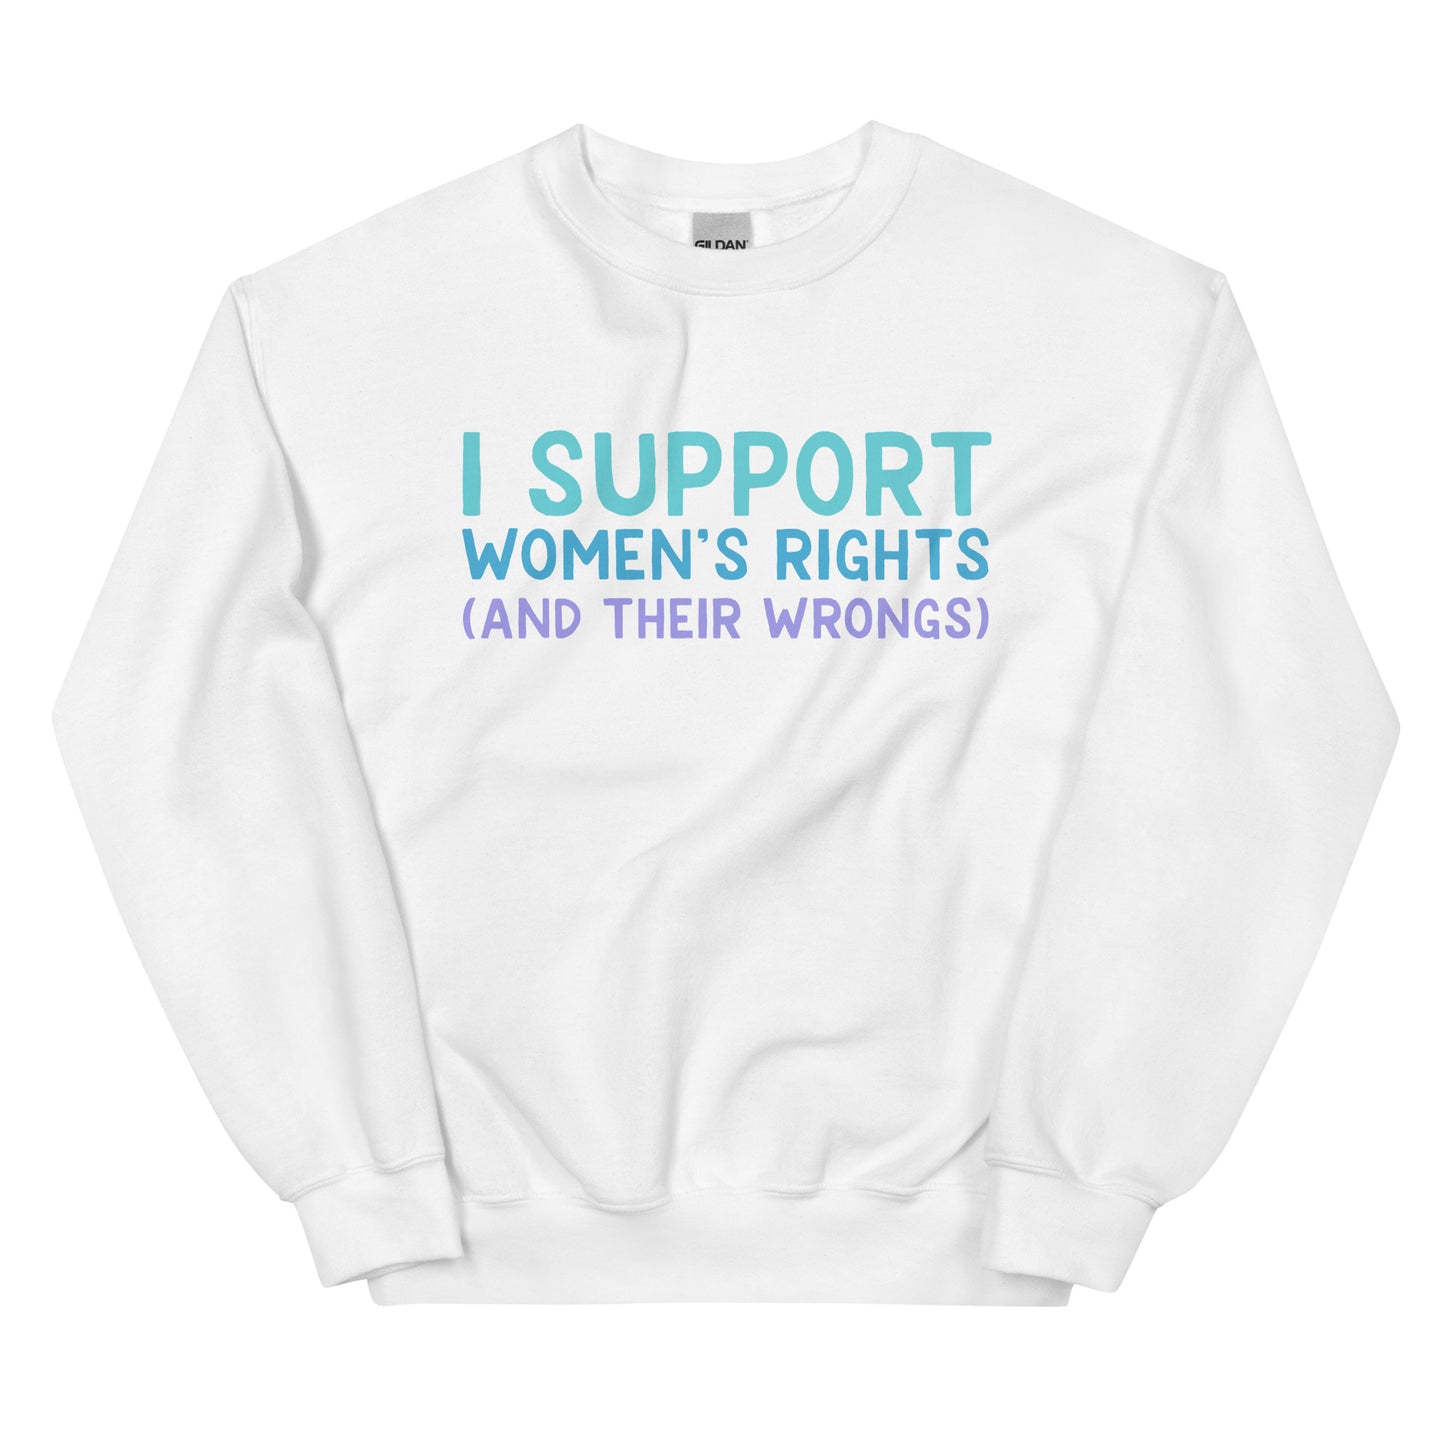 I Support Women's Rights (and Wrongs) Unisex Sweatshirt V2